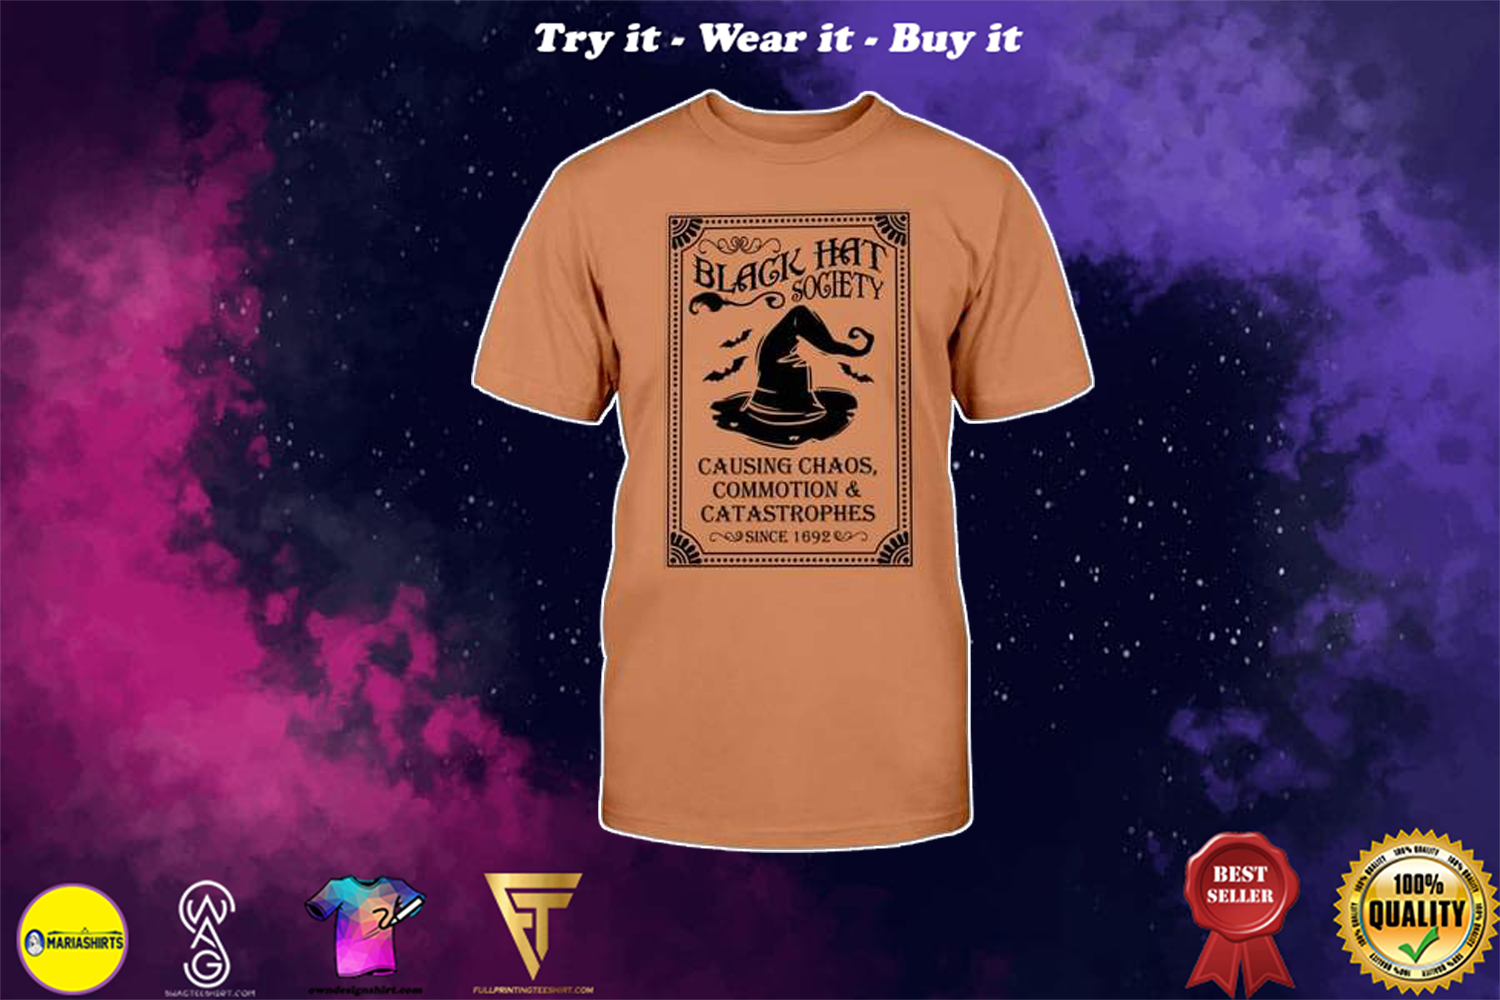 [special edition] Halloween black hat society causing chaos commotion and catastrophes shirt – Maria